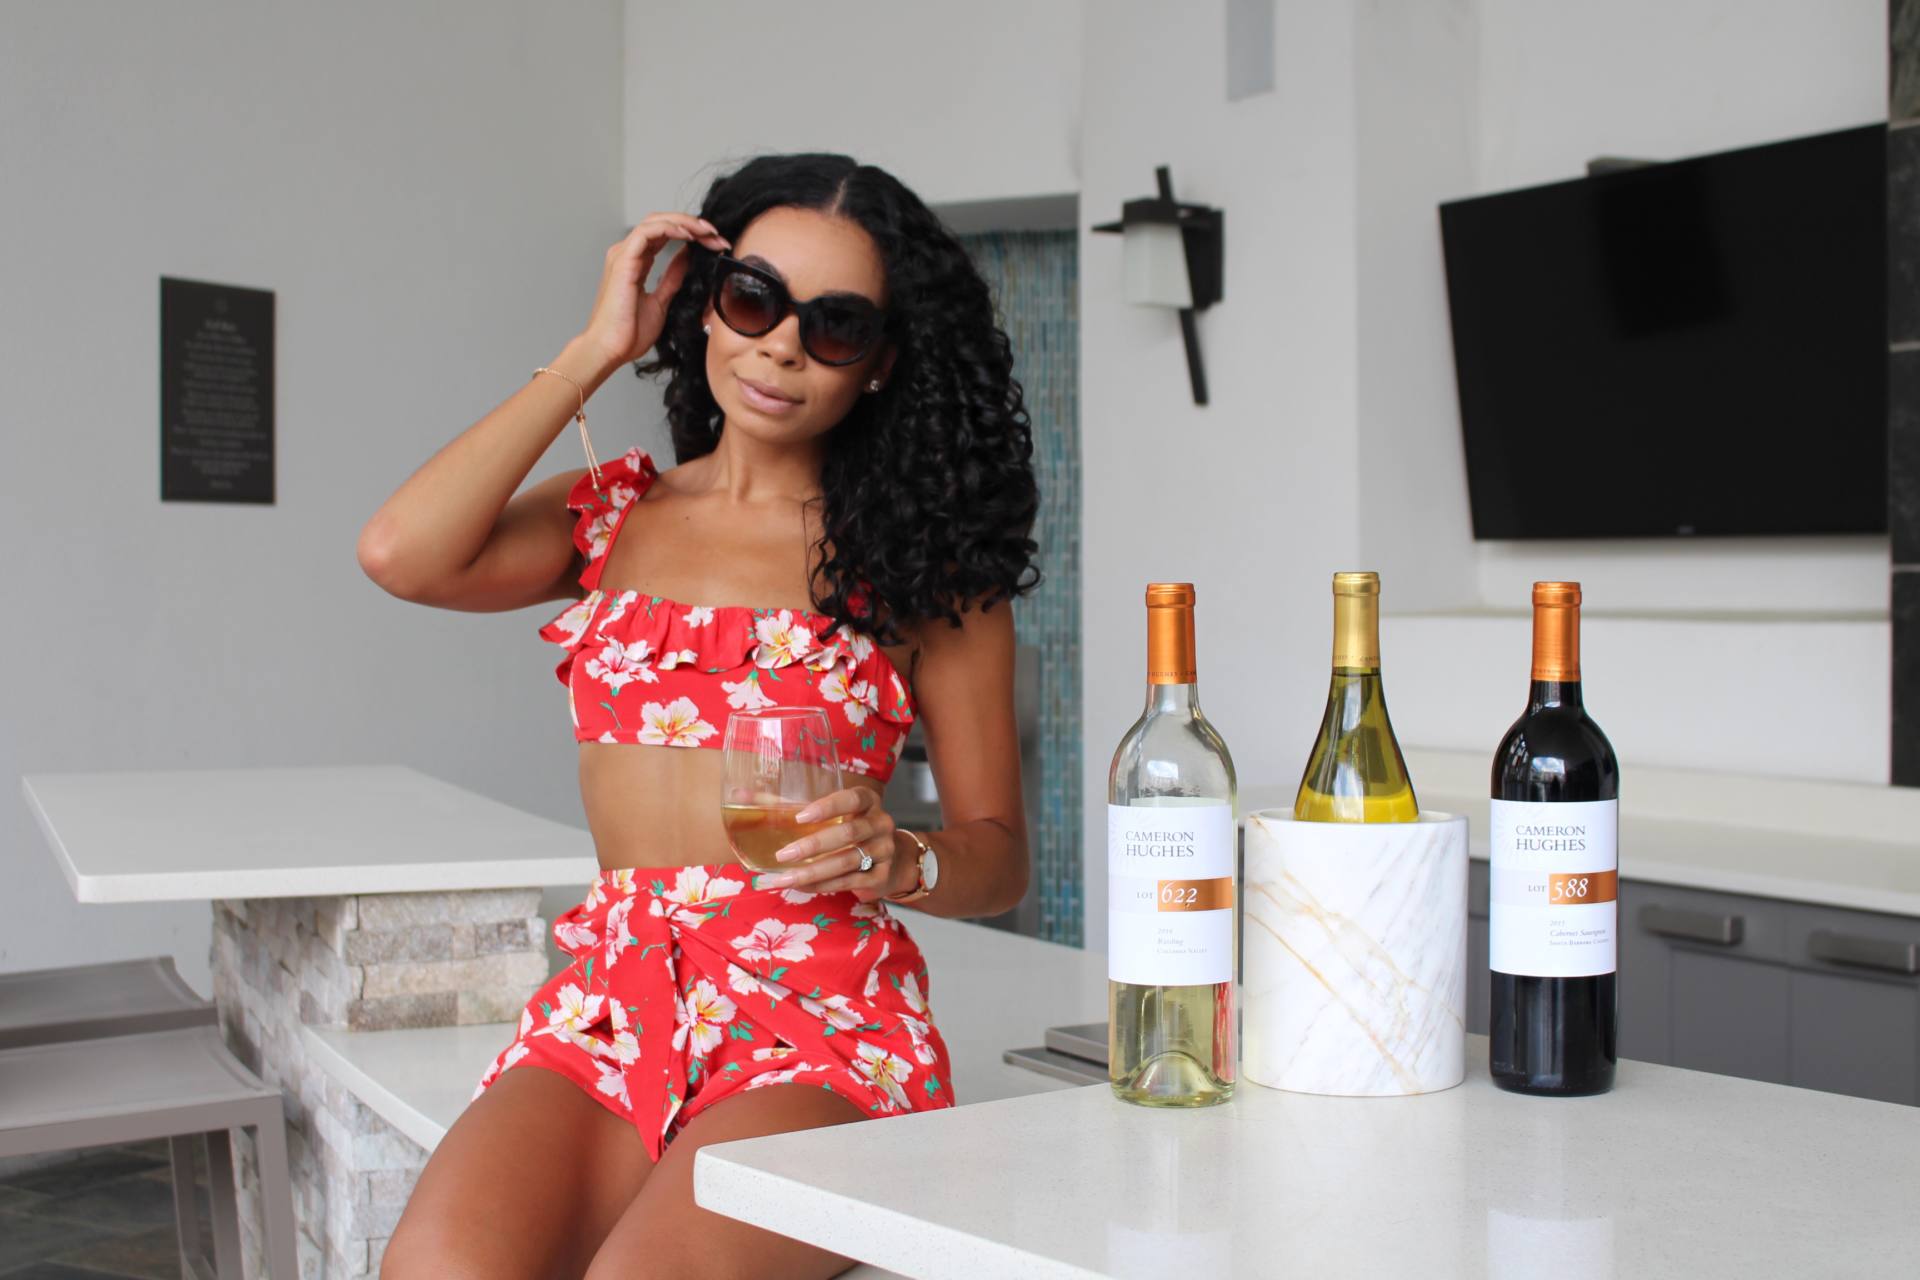 Prepping for Summer with Cameron Hughes Wine | The B Werd